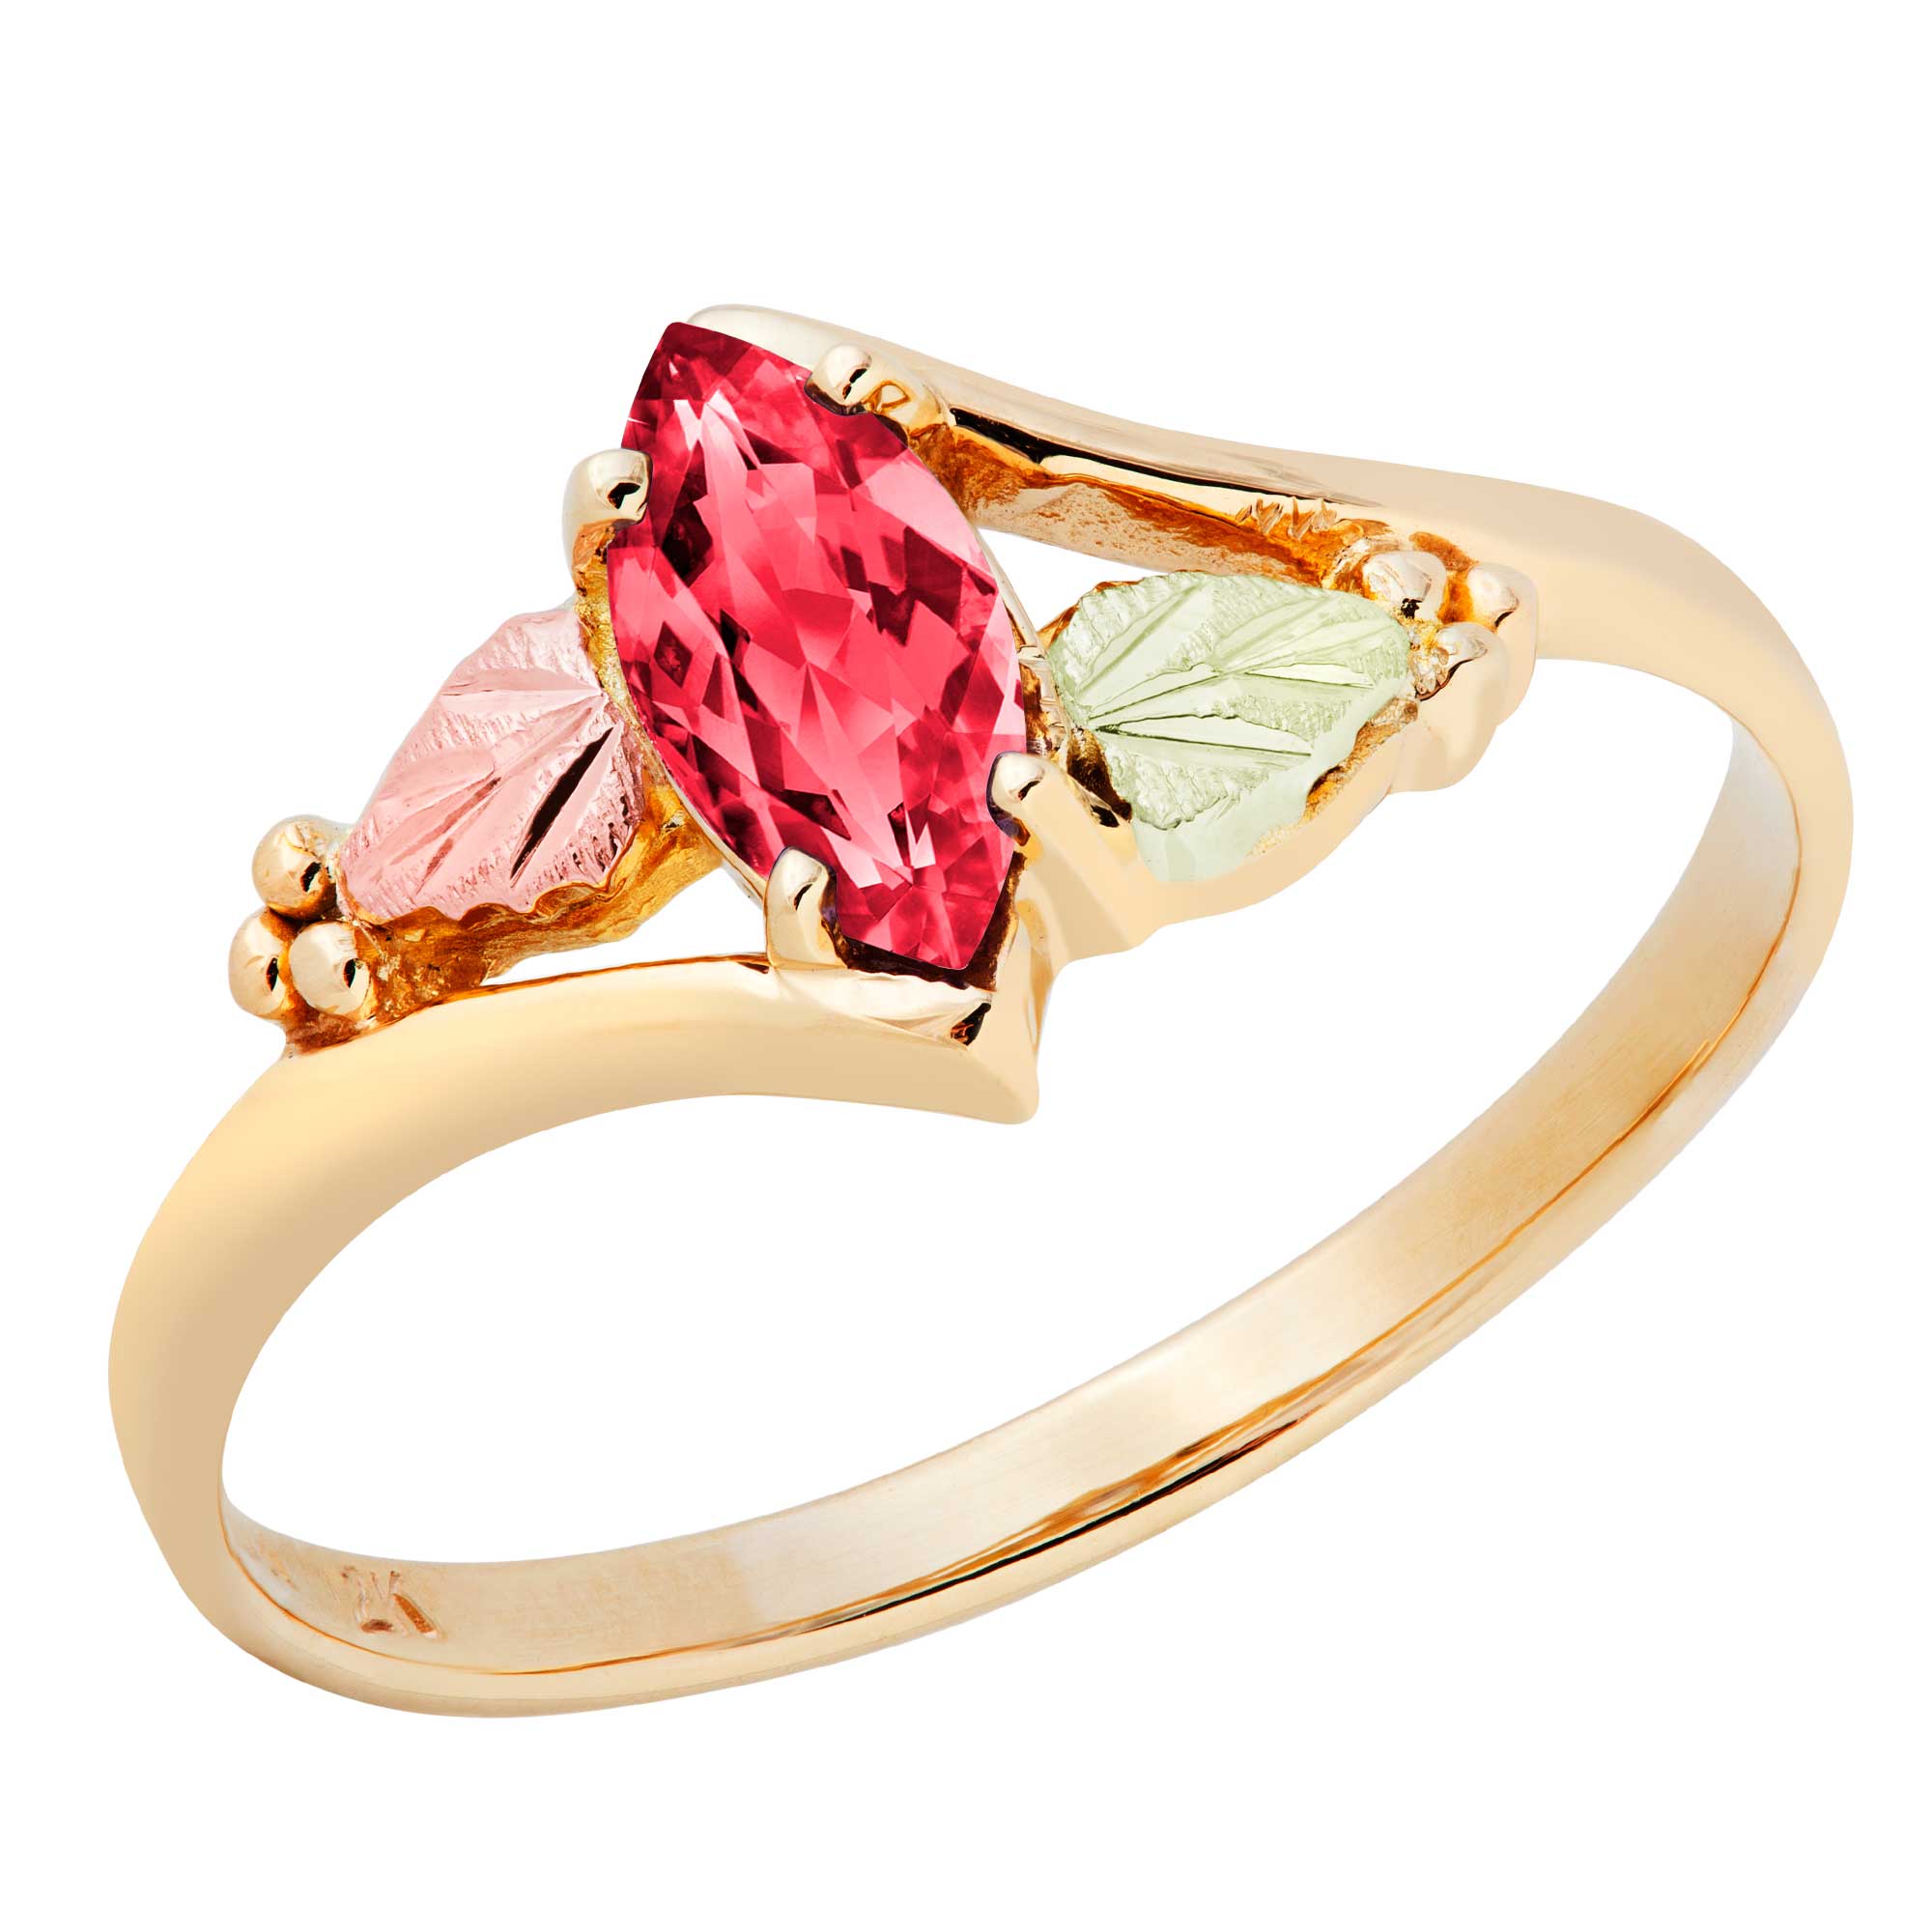 Created Ruby Marquise July Birthstone Bypass Ring, Black Hills Gold motif. 